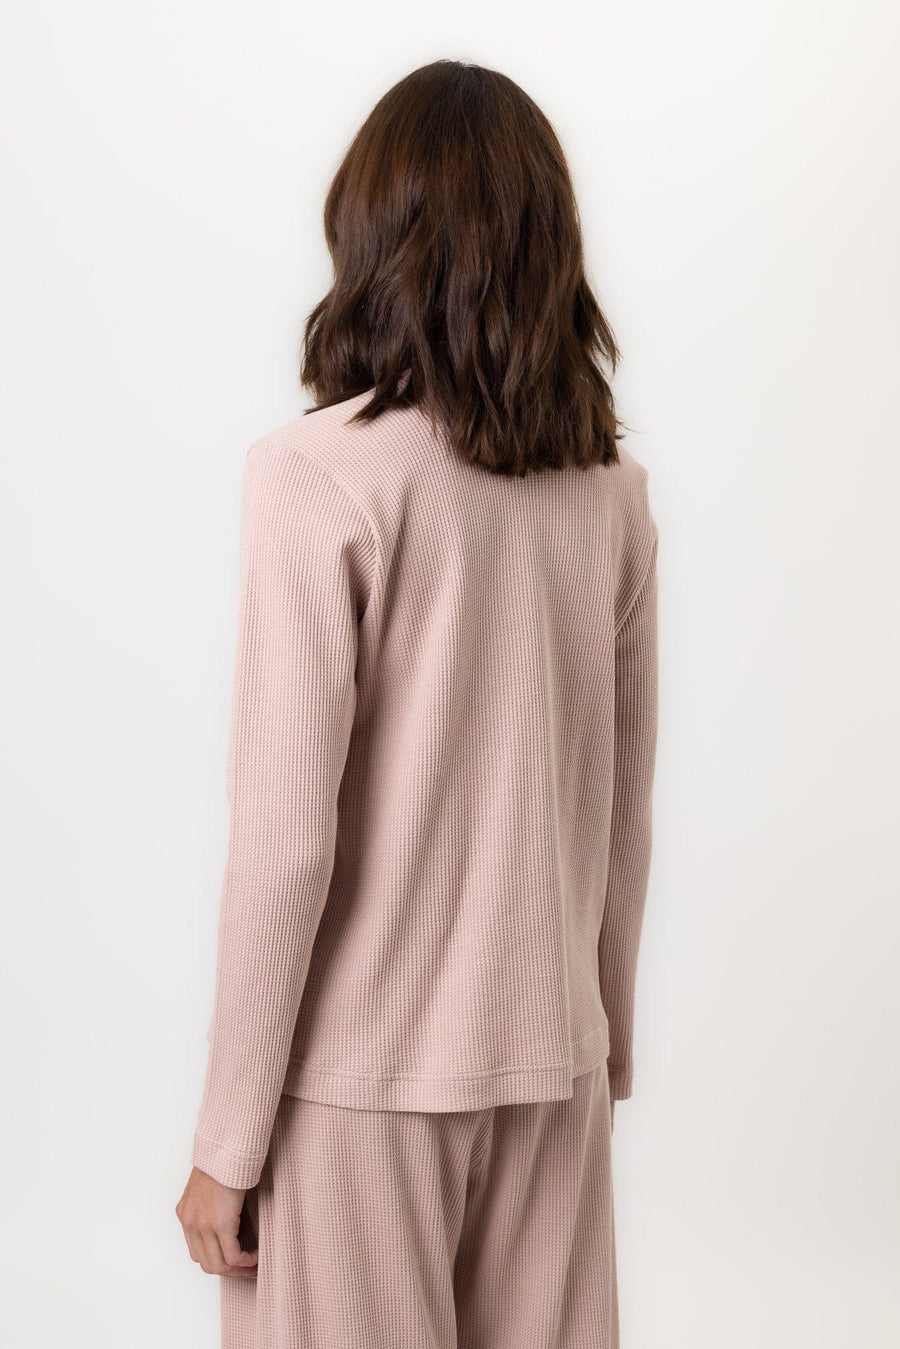 Blithe Top | Dusty Pink Blithe Top Tops Pajamas Australia Online | Reverie the Label  TOPS Blithe Top